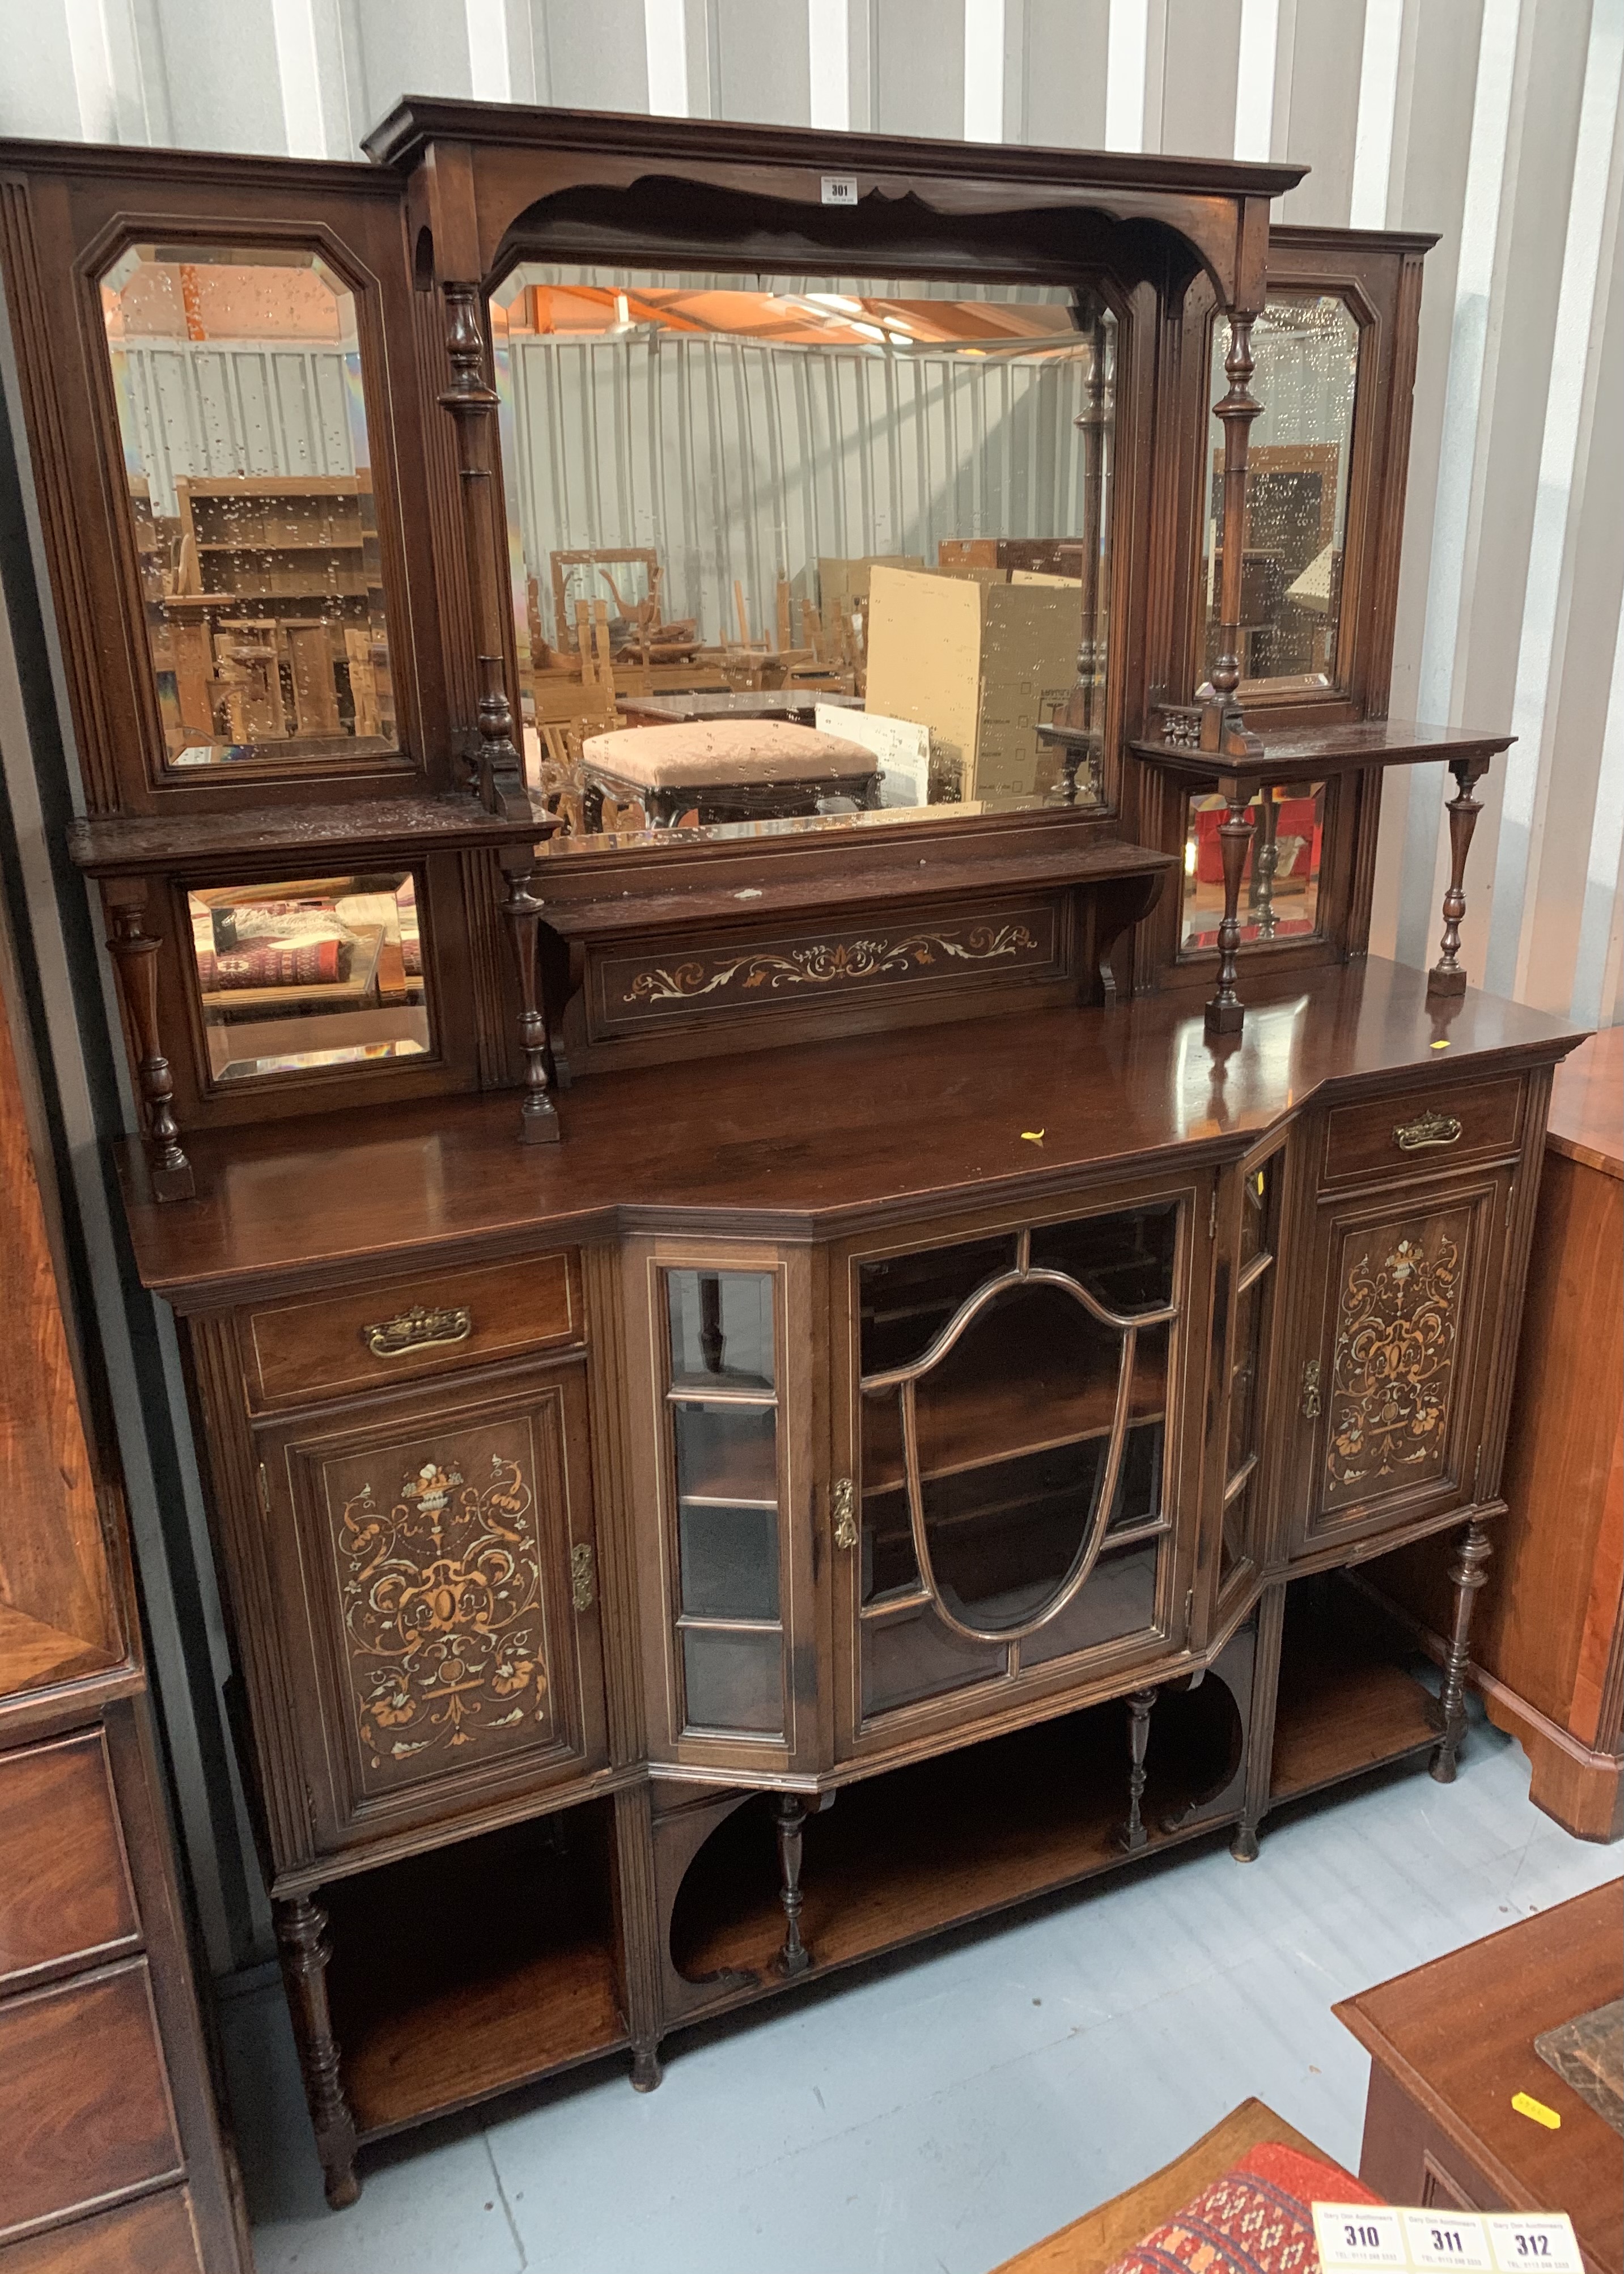 Inlaid antique mirrorback cabinet. 75” high, 60” wide, 18” depth - Image 2 of 6